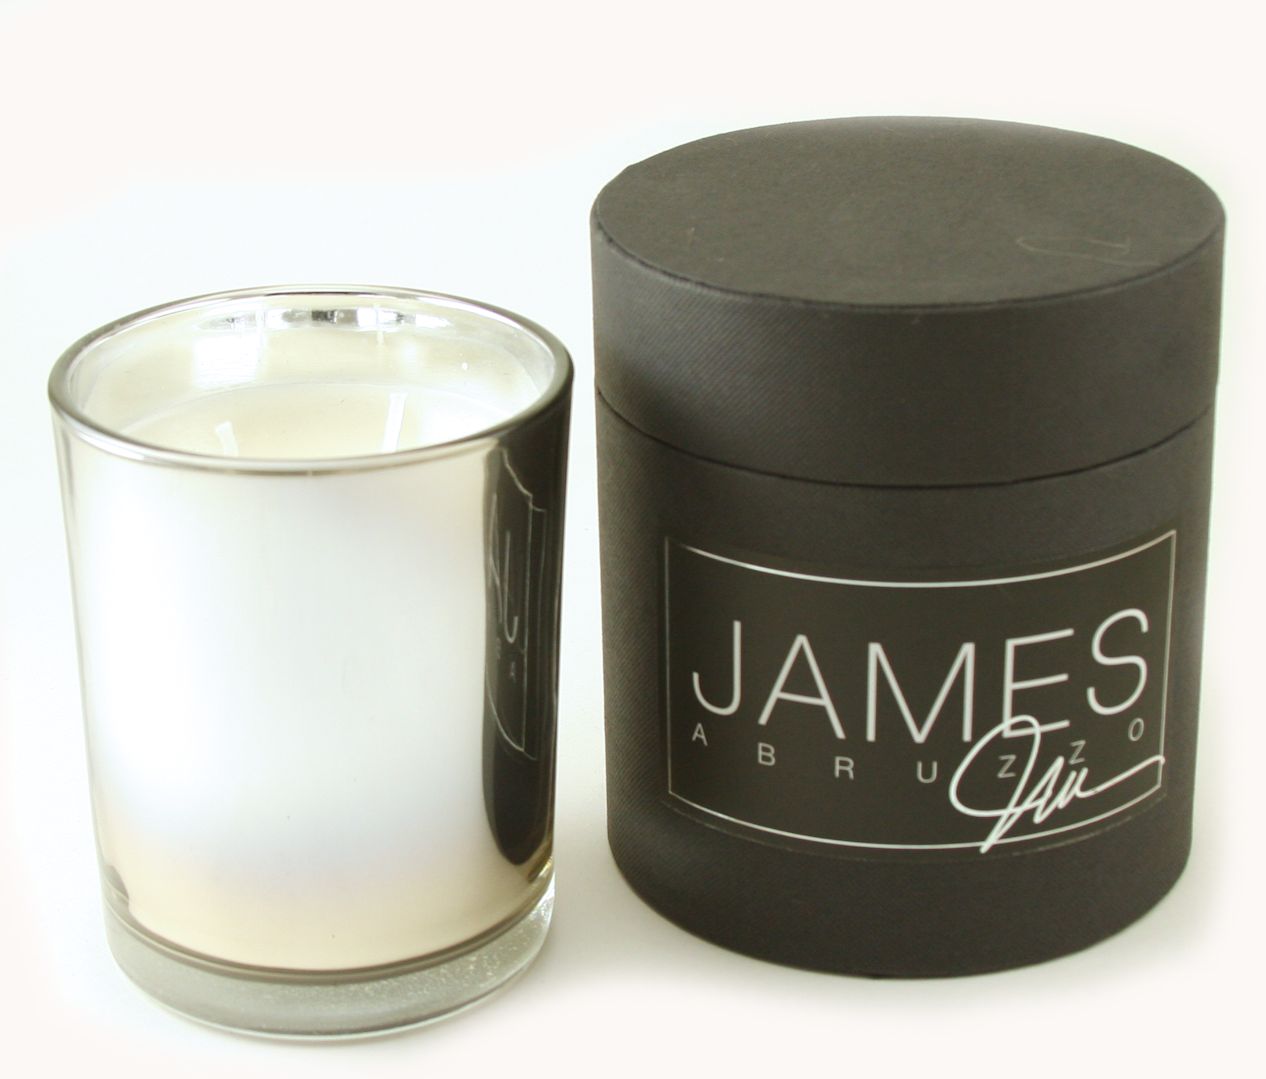 ABRUZZO James by Jimmy Delaurentis Luxury 18 oz Scented Jar Candle